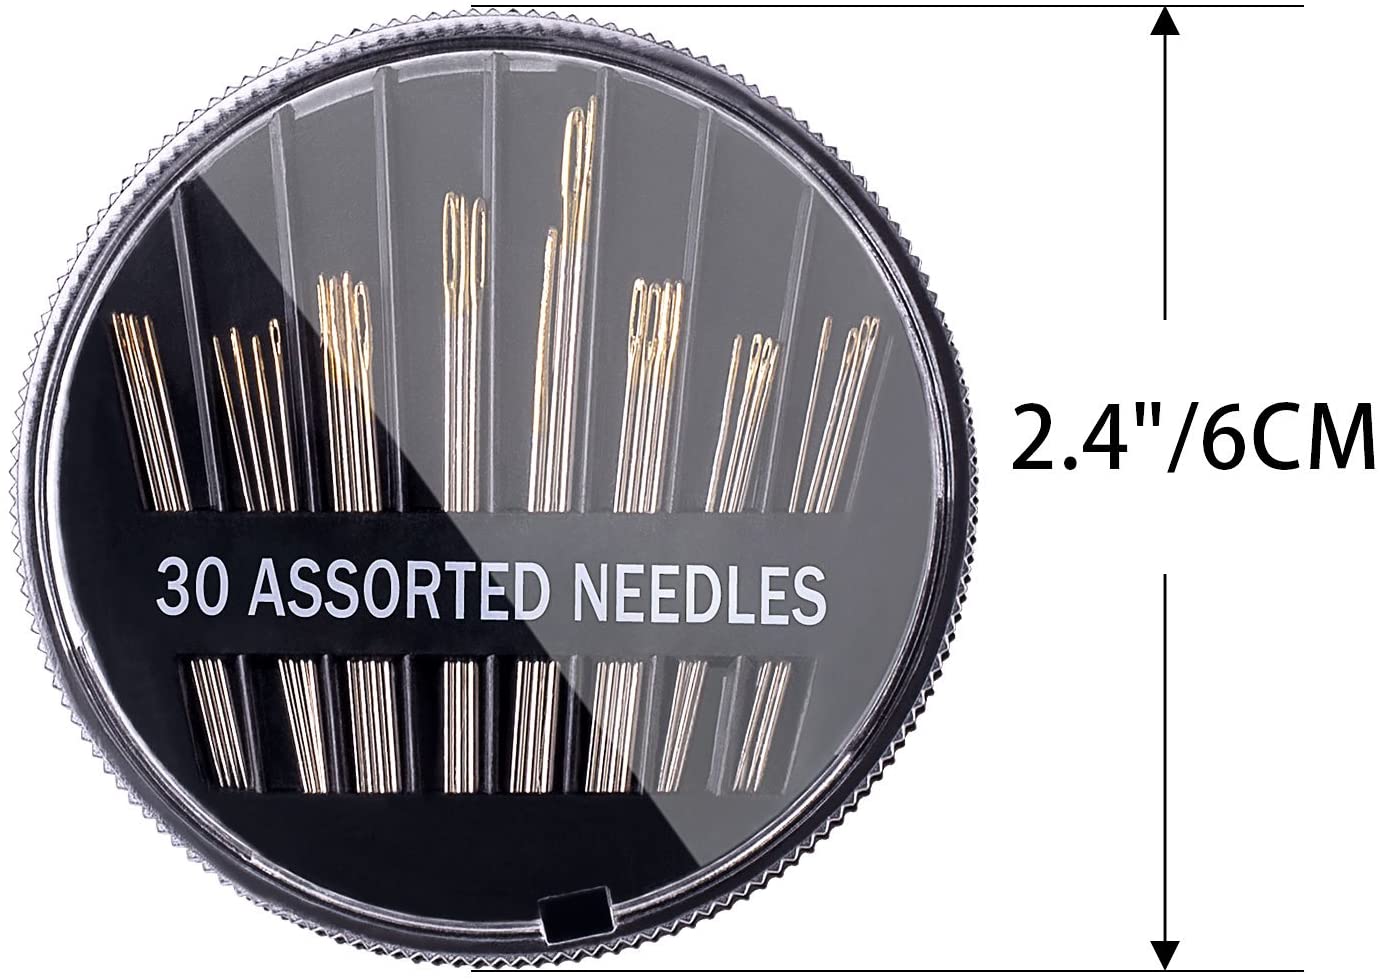 NiftyPlaza Hand Sewing Needles for Sewing Repair, Premium quality 60-Count Assorted Stainless Steel Needles - Pack of 2